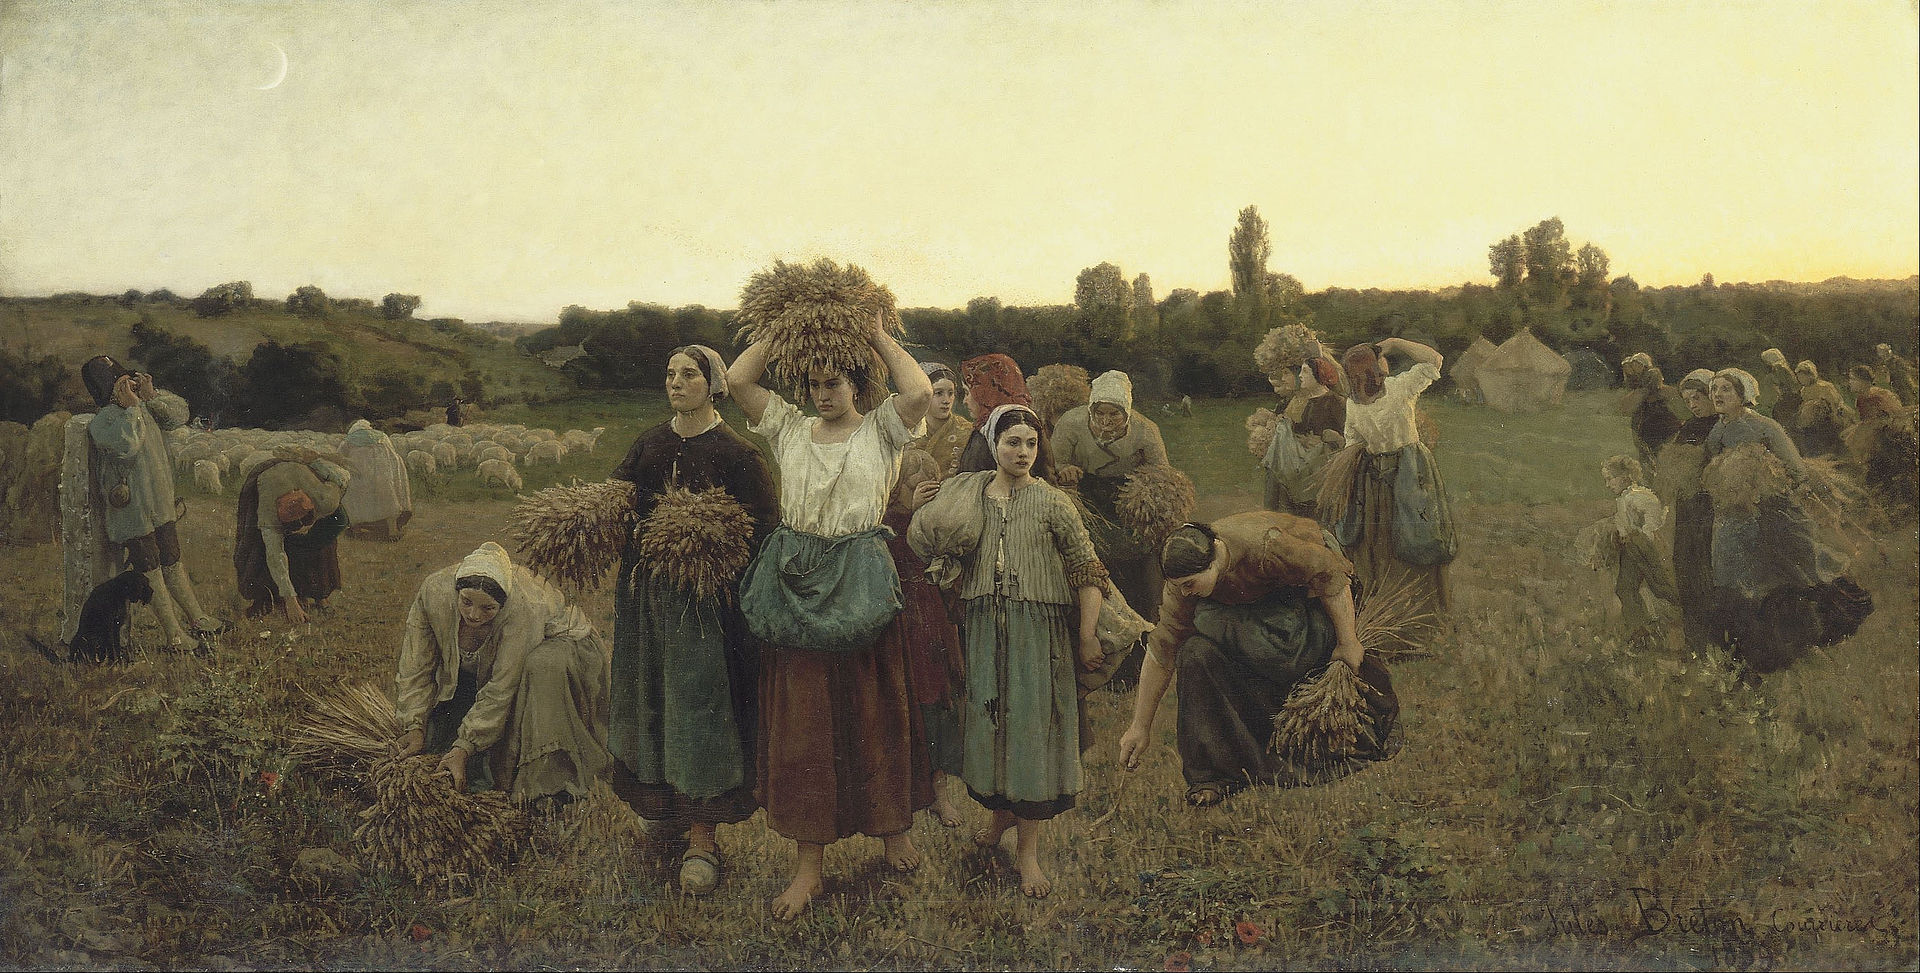 Peasants carrying stalks of wheat in the farm fields